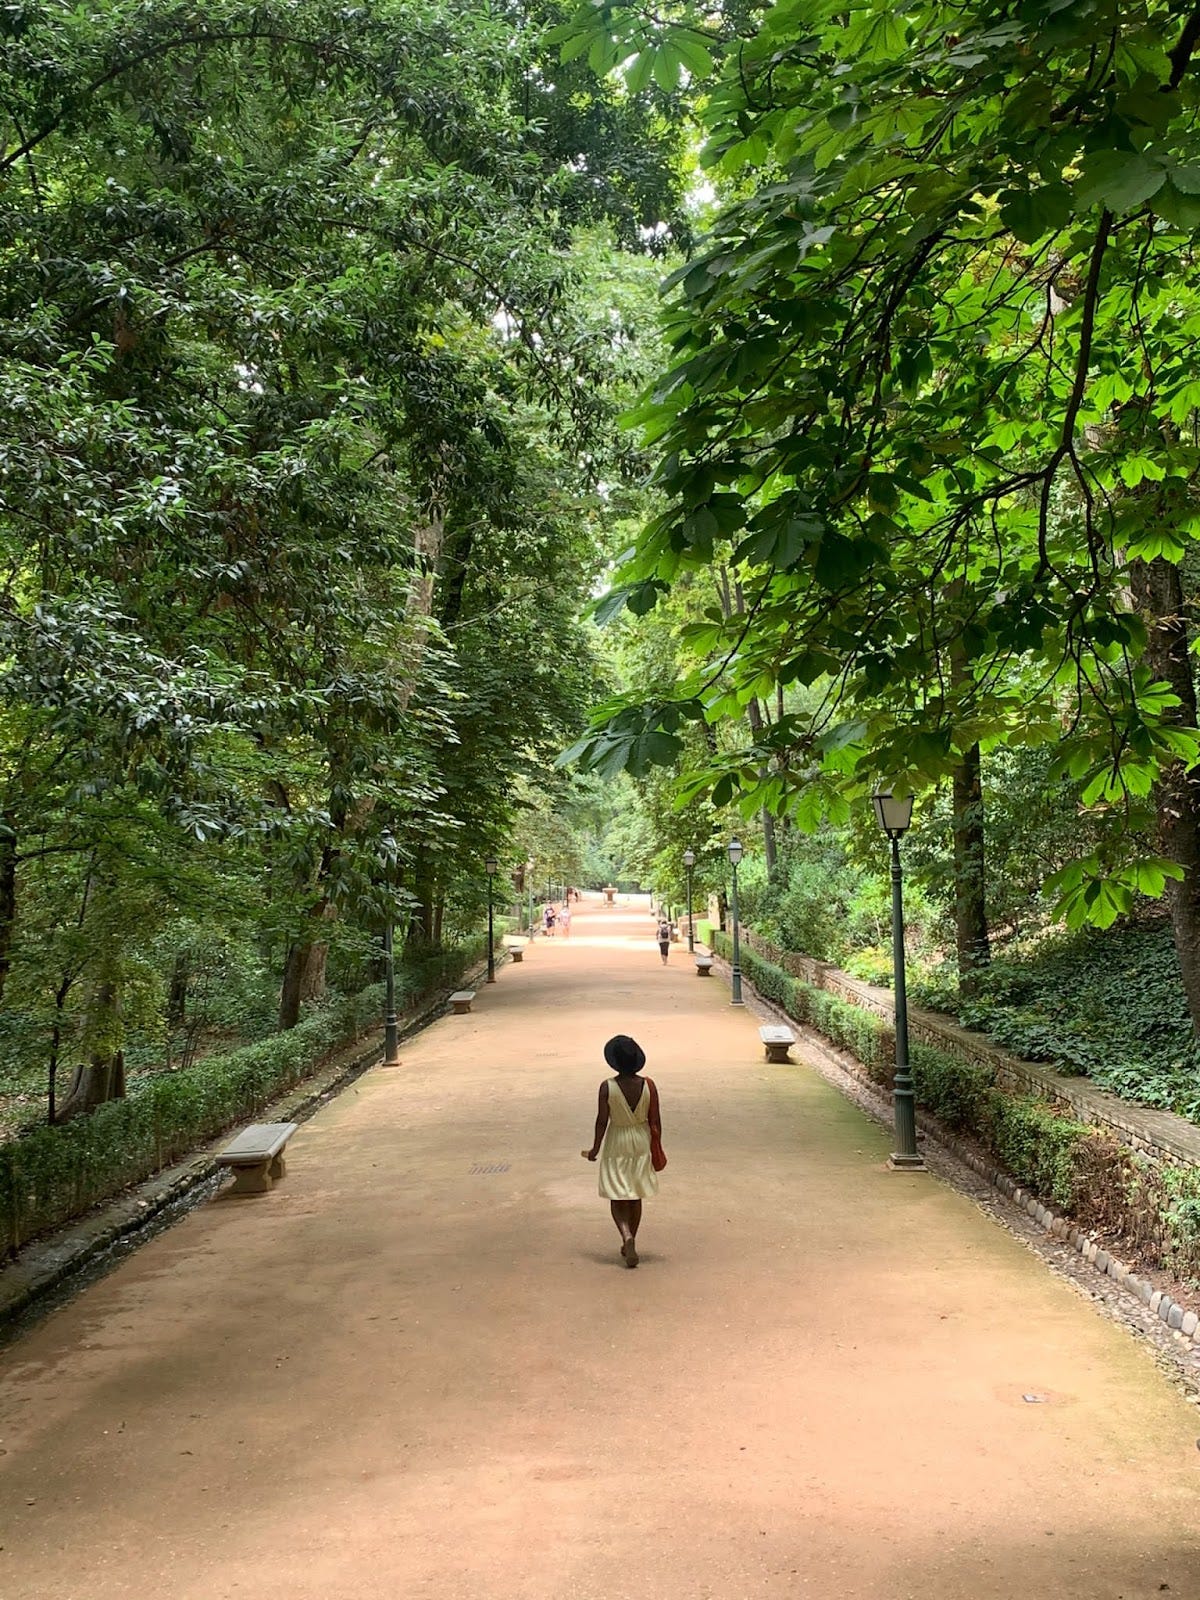 A photo of a women in a yellow dress walking through a paved path with trees